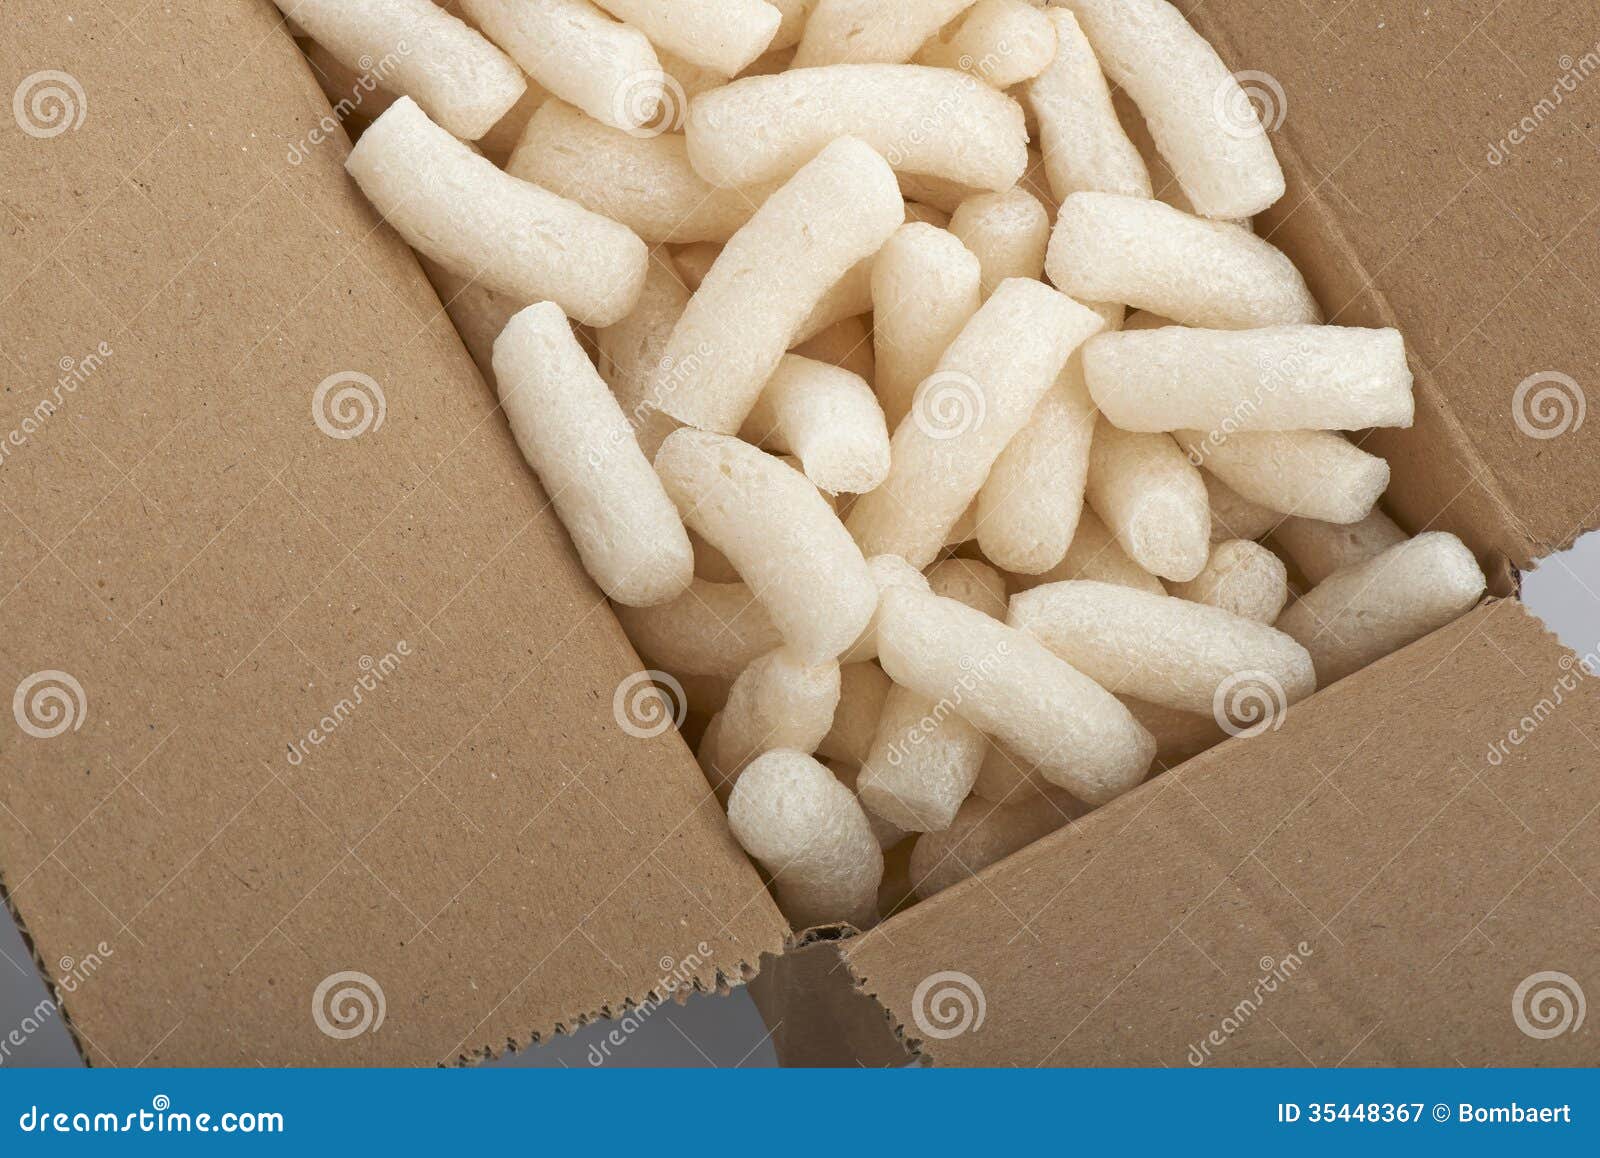 Cardboard Box With Yellow Packing Styrofoam Peanuts Royalty Free Stock Photography ...